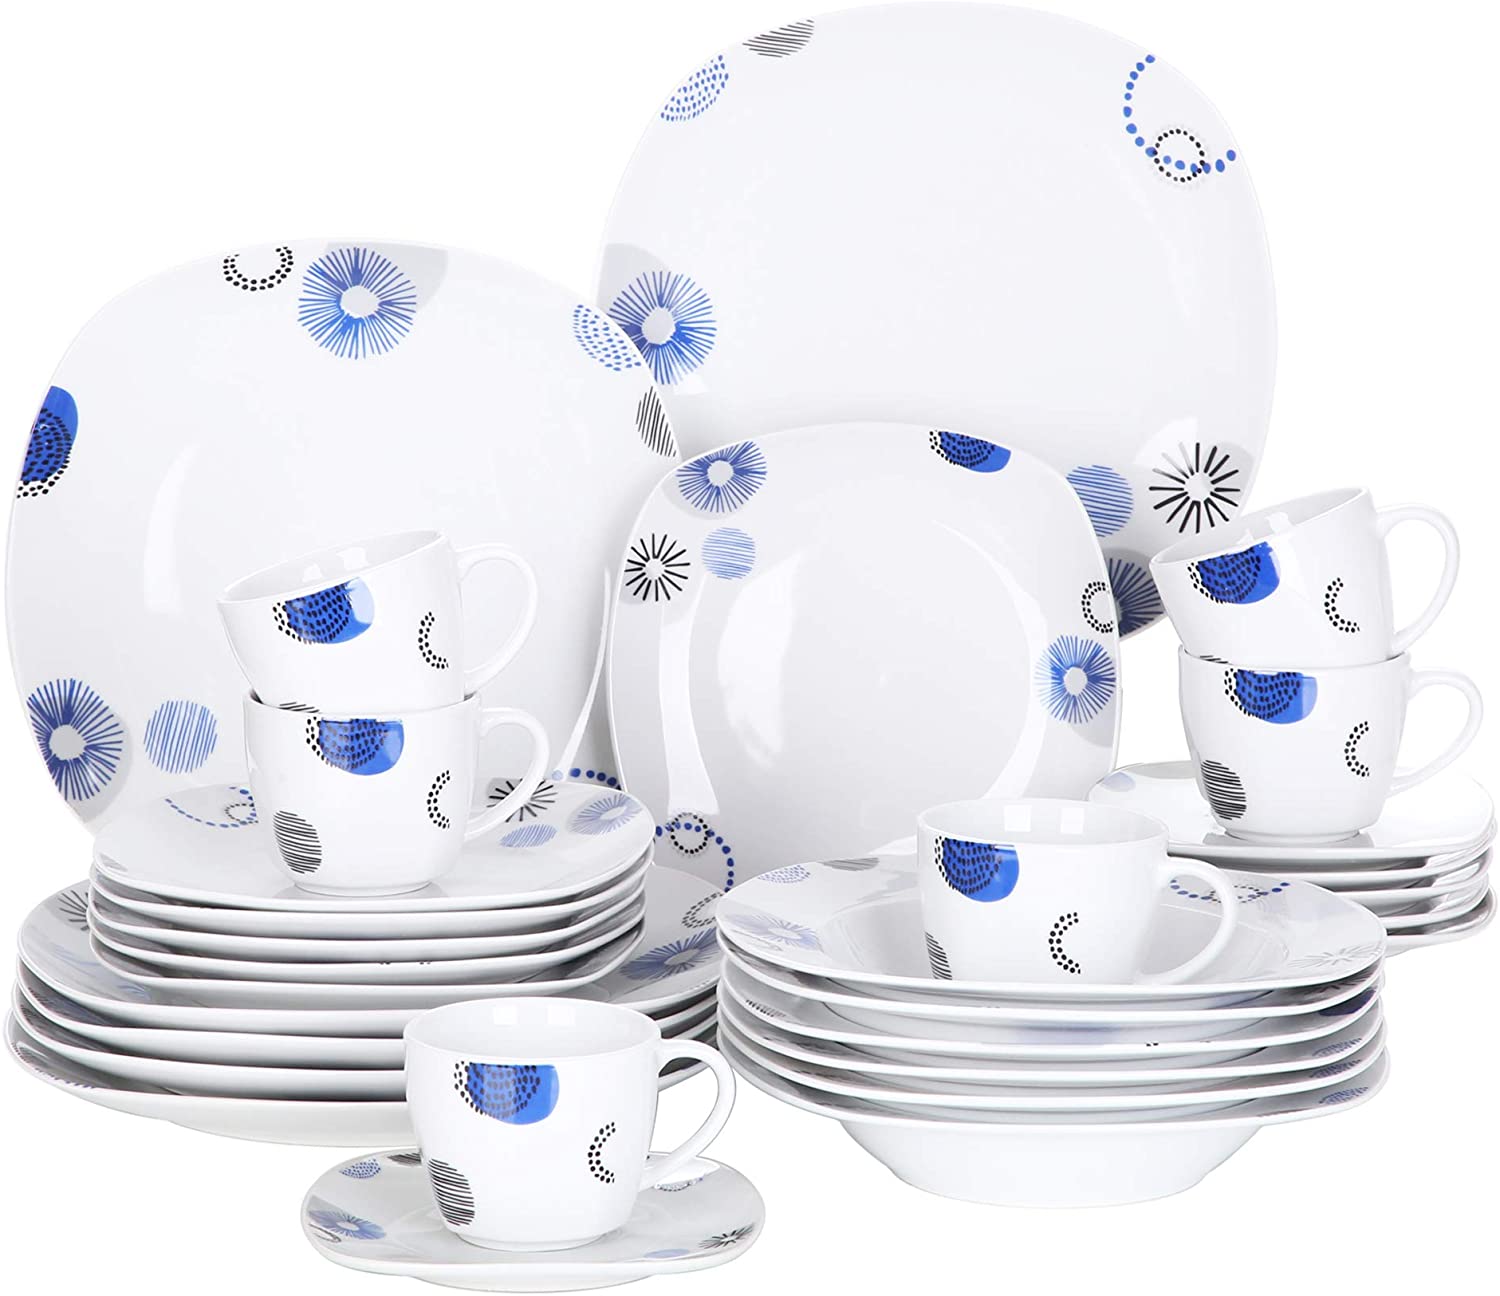 VEWEET Dinner Service 30 Pieces | Crockery Set Includes Coffee Cups, Saucer, Dessert Plate, Dinner Plate and Soup Plate | Complete Service for 6 People